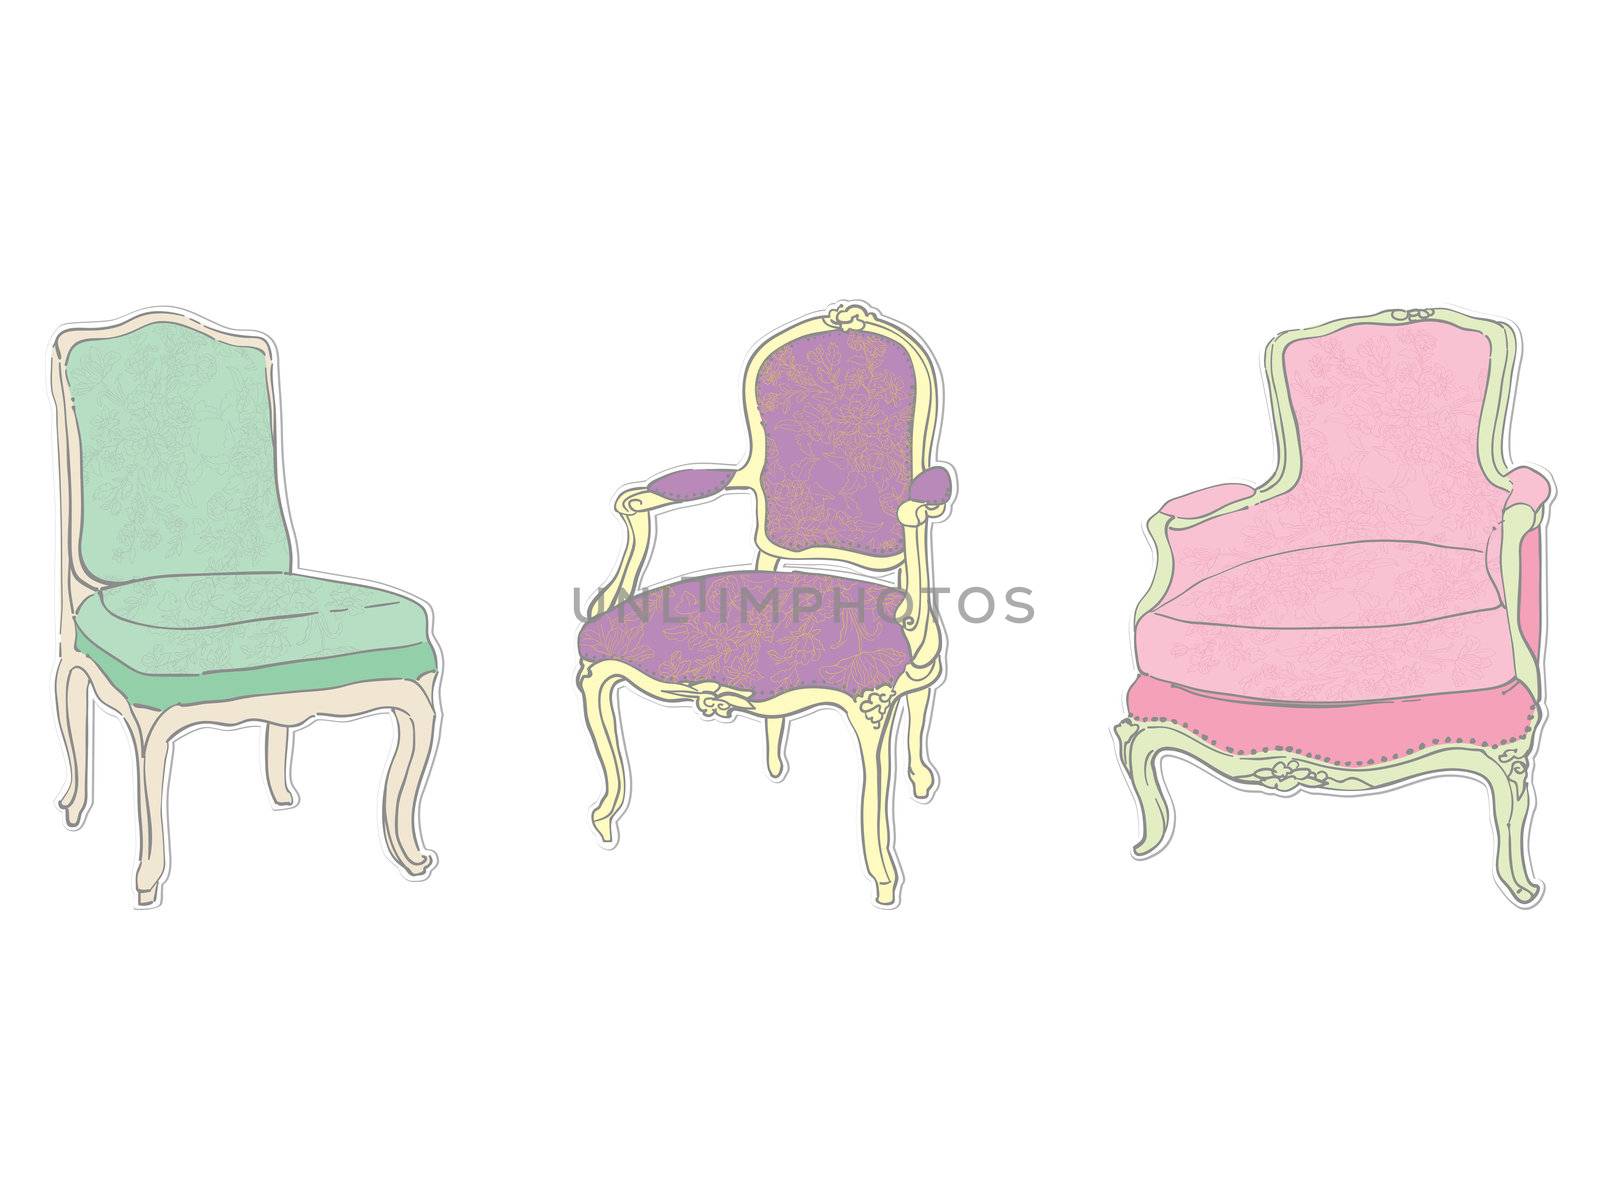 antique rococo chairs and armchair with floral tapestry stickers isolated on white